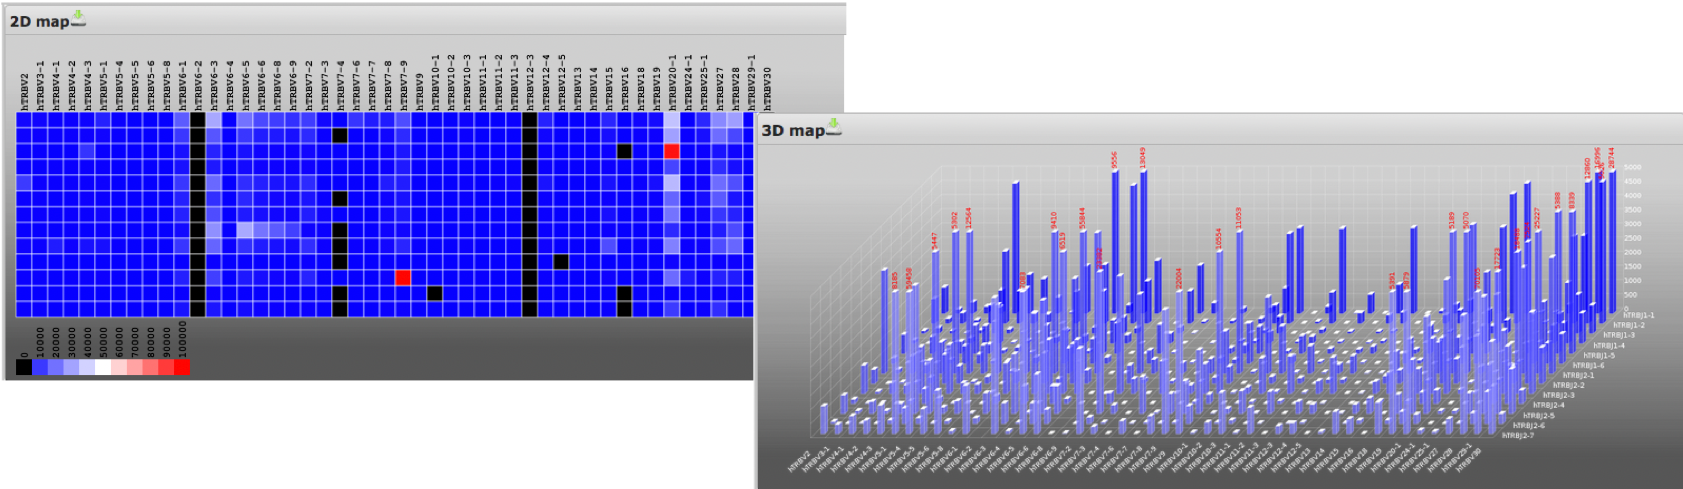 iRweb 2D and 3D heatmaps. iRweb 2D heat map showing the relative diversity of all identified V-J combinations within and between samples using color gradients from cool to warm. iRweb 3D heat maps show relative immune repertoire diversity using different heights corresponding to the frequency of different variants, allowing for quick visual comparison.